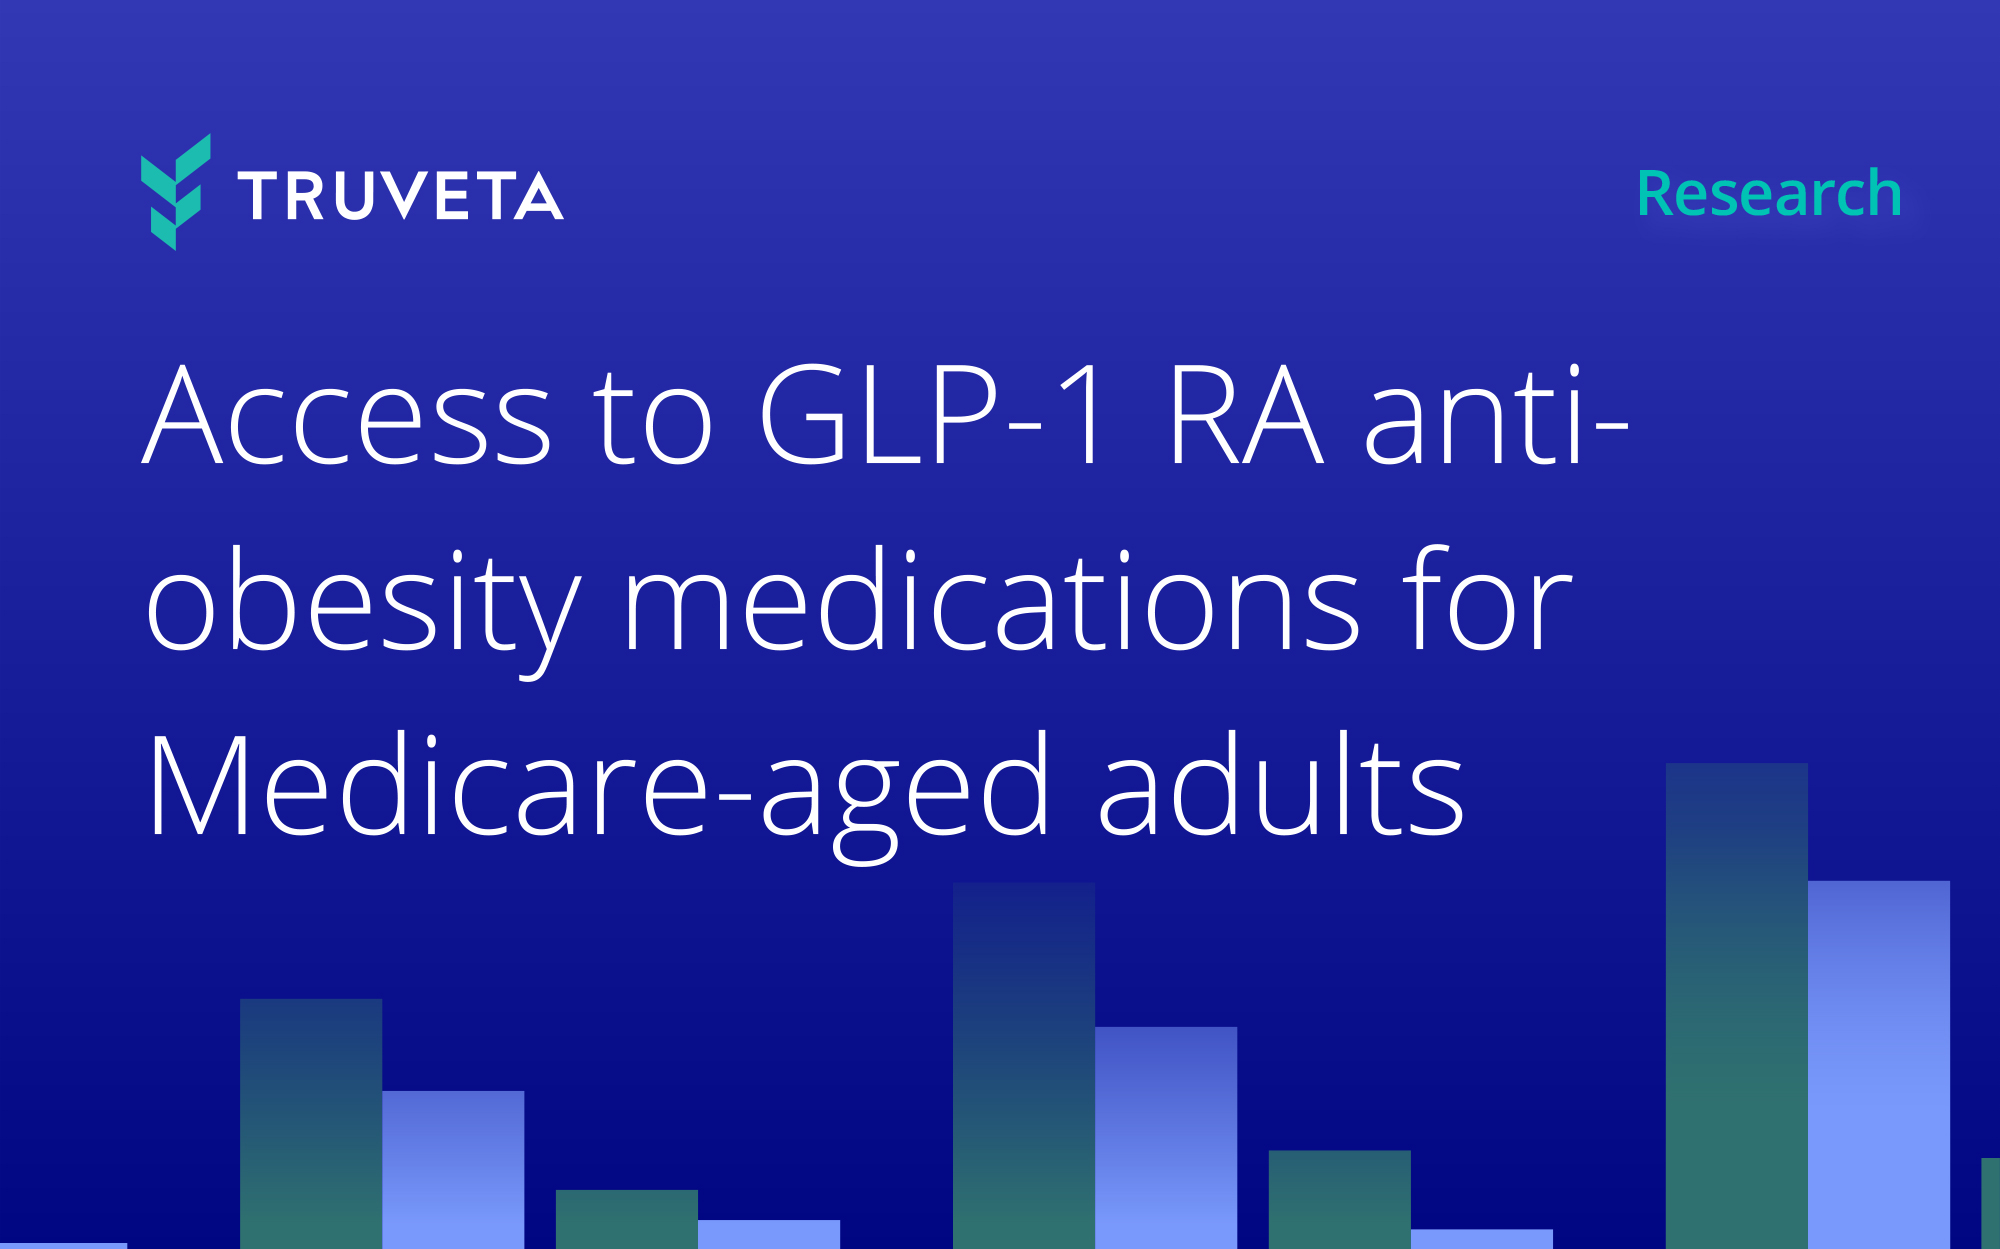 Truveta Research and Zeke Emanuel, MD, PhD, from the University of Pennsylvania explored the first-time prescribing and dispensing of GLP-1 RA anti-obesity medications for US older adults aged 60 to 69 with obesity or overweight who don’t have type 2 diabetes.